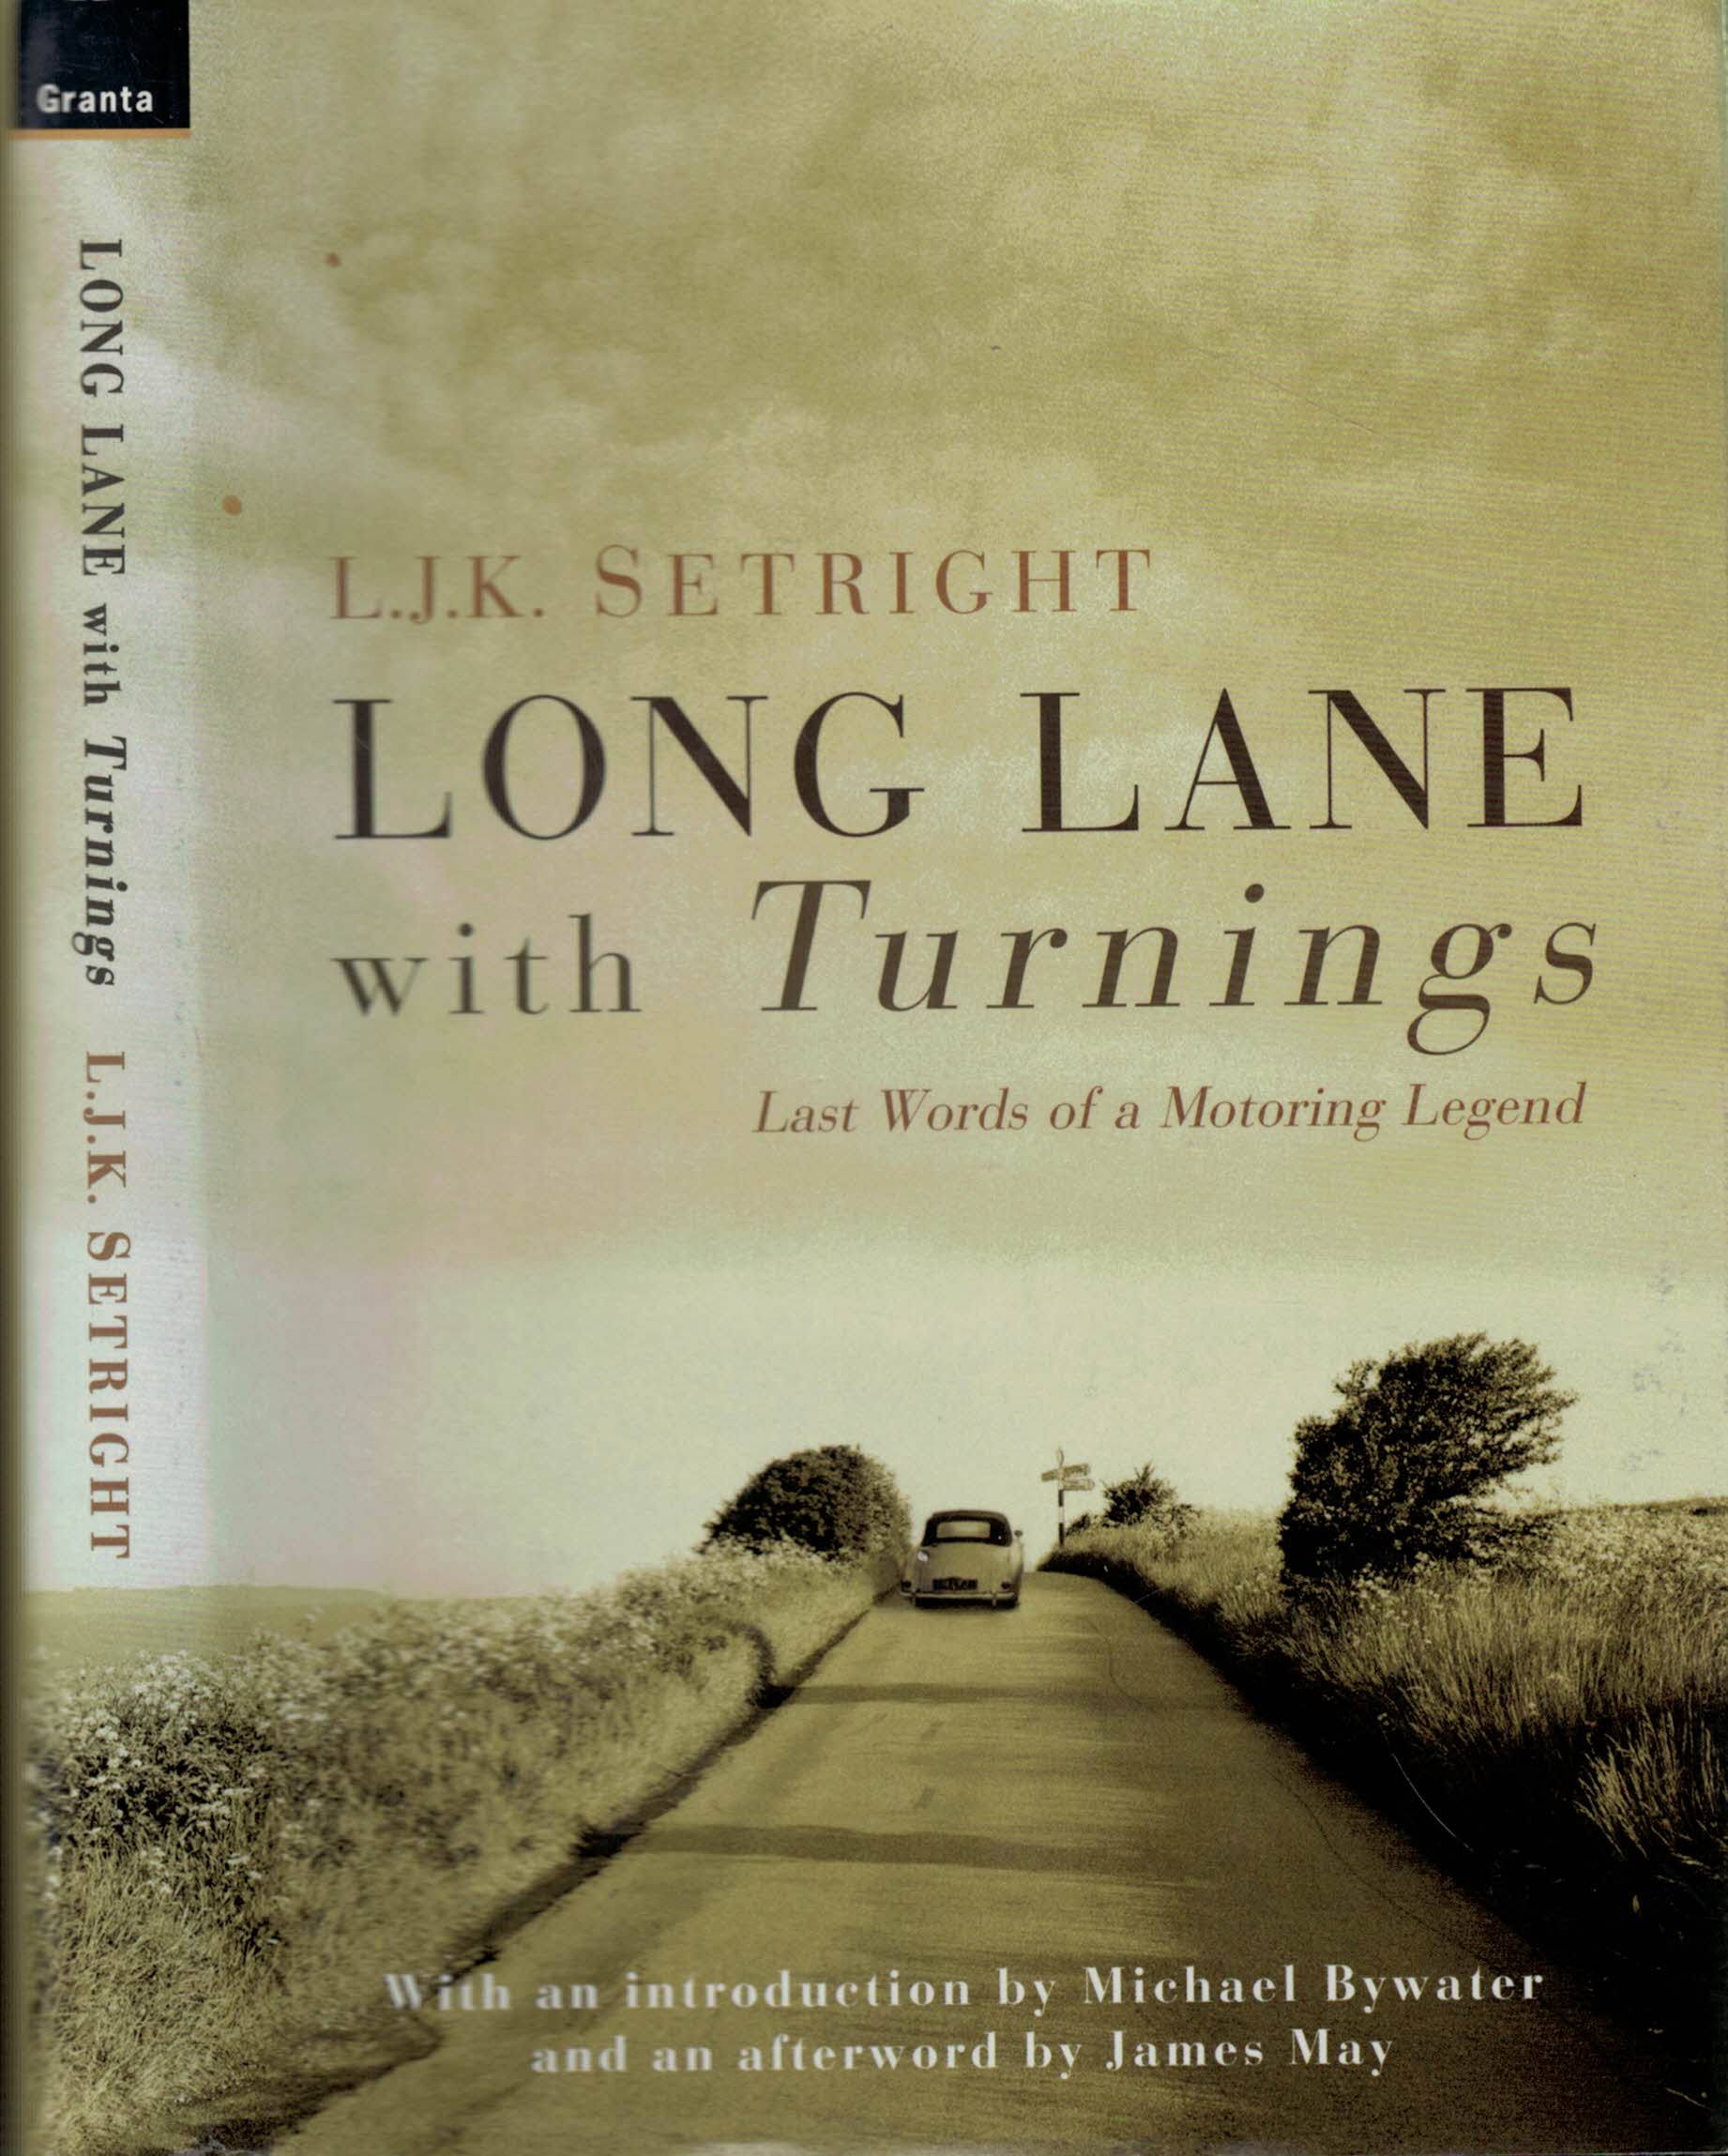 Long Lane with Turnings. Last Words of a Motoring Legend.